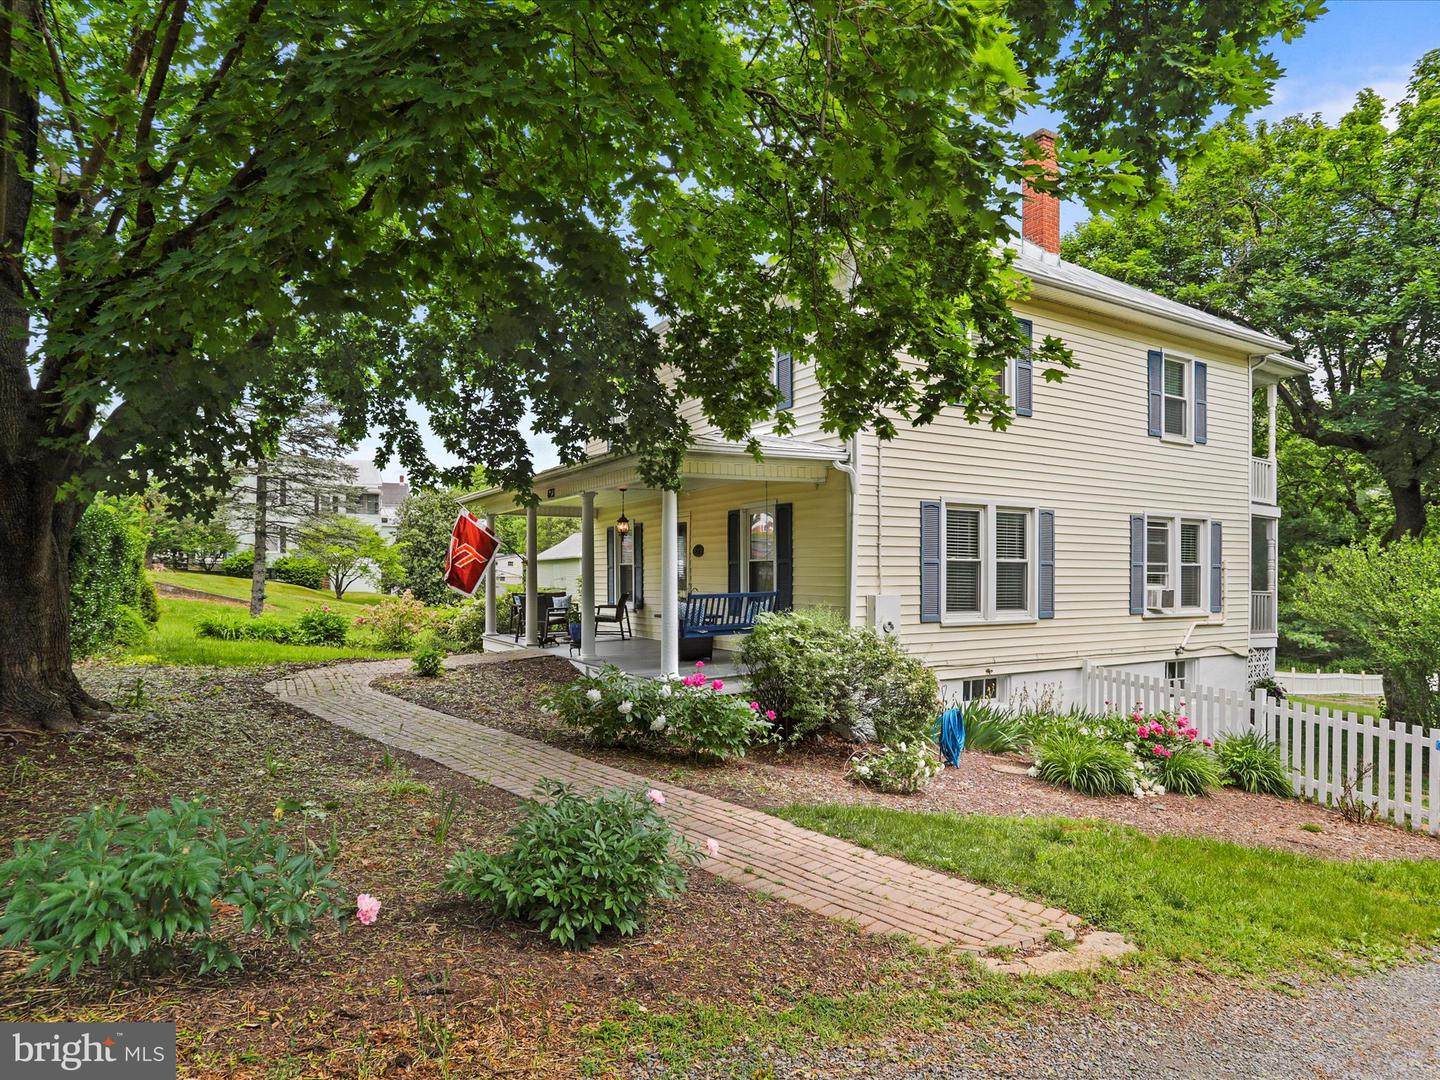 623 S MAIN ST   - REMAX Realty Group Rehoboth Real Estate